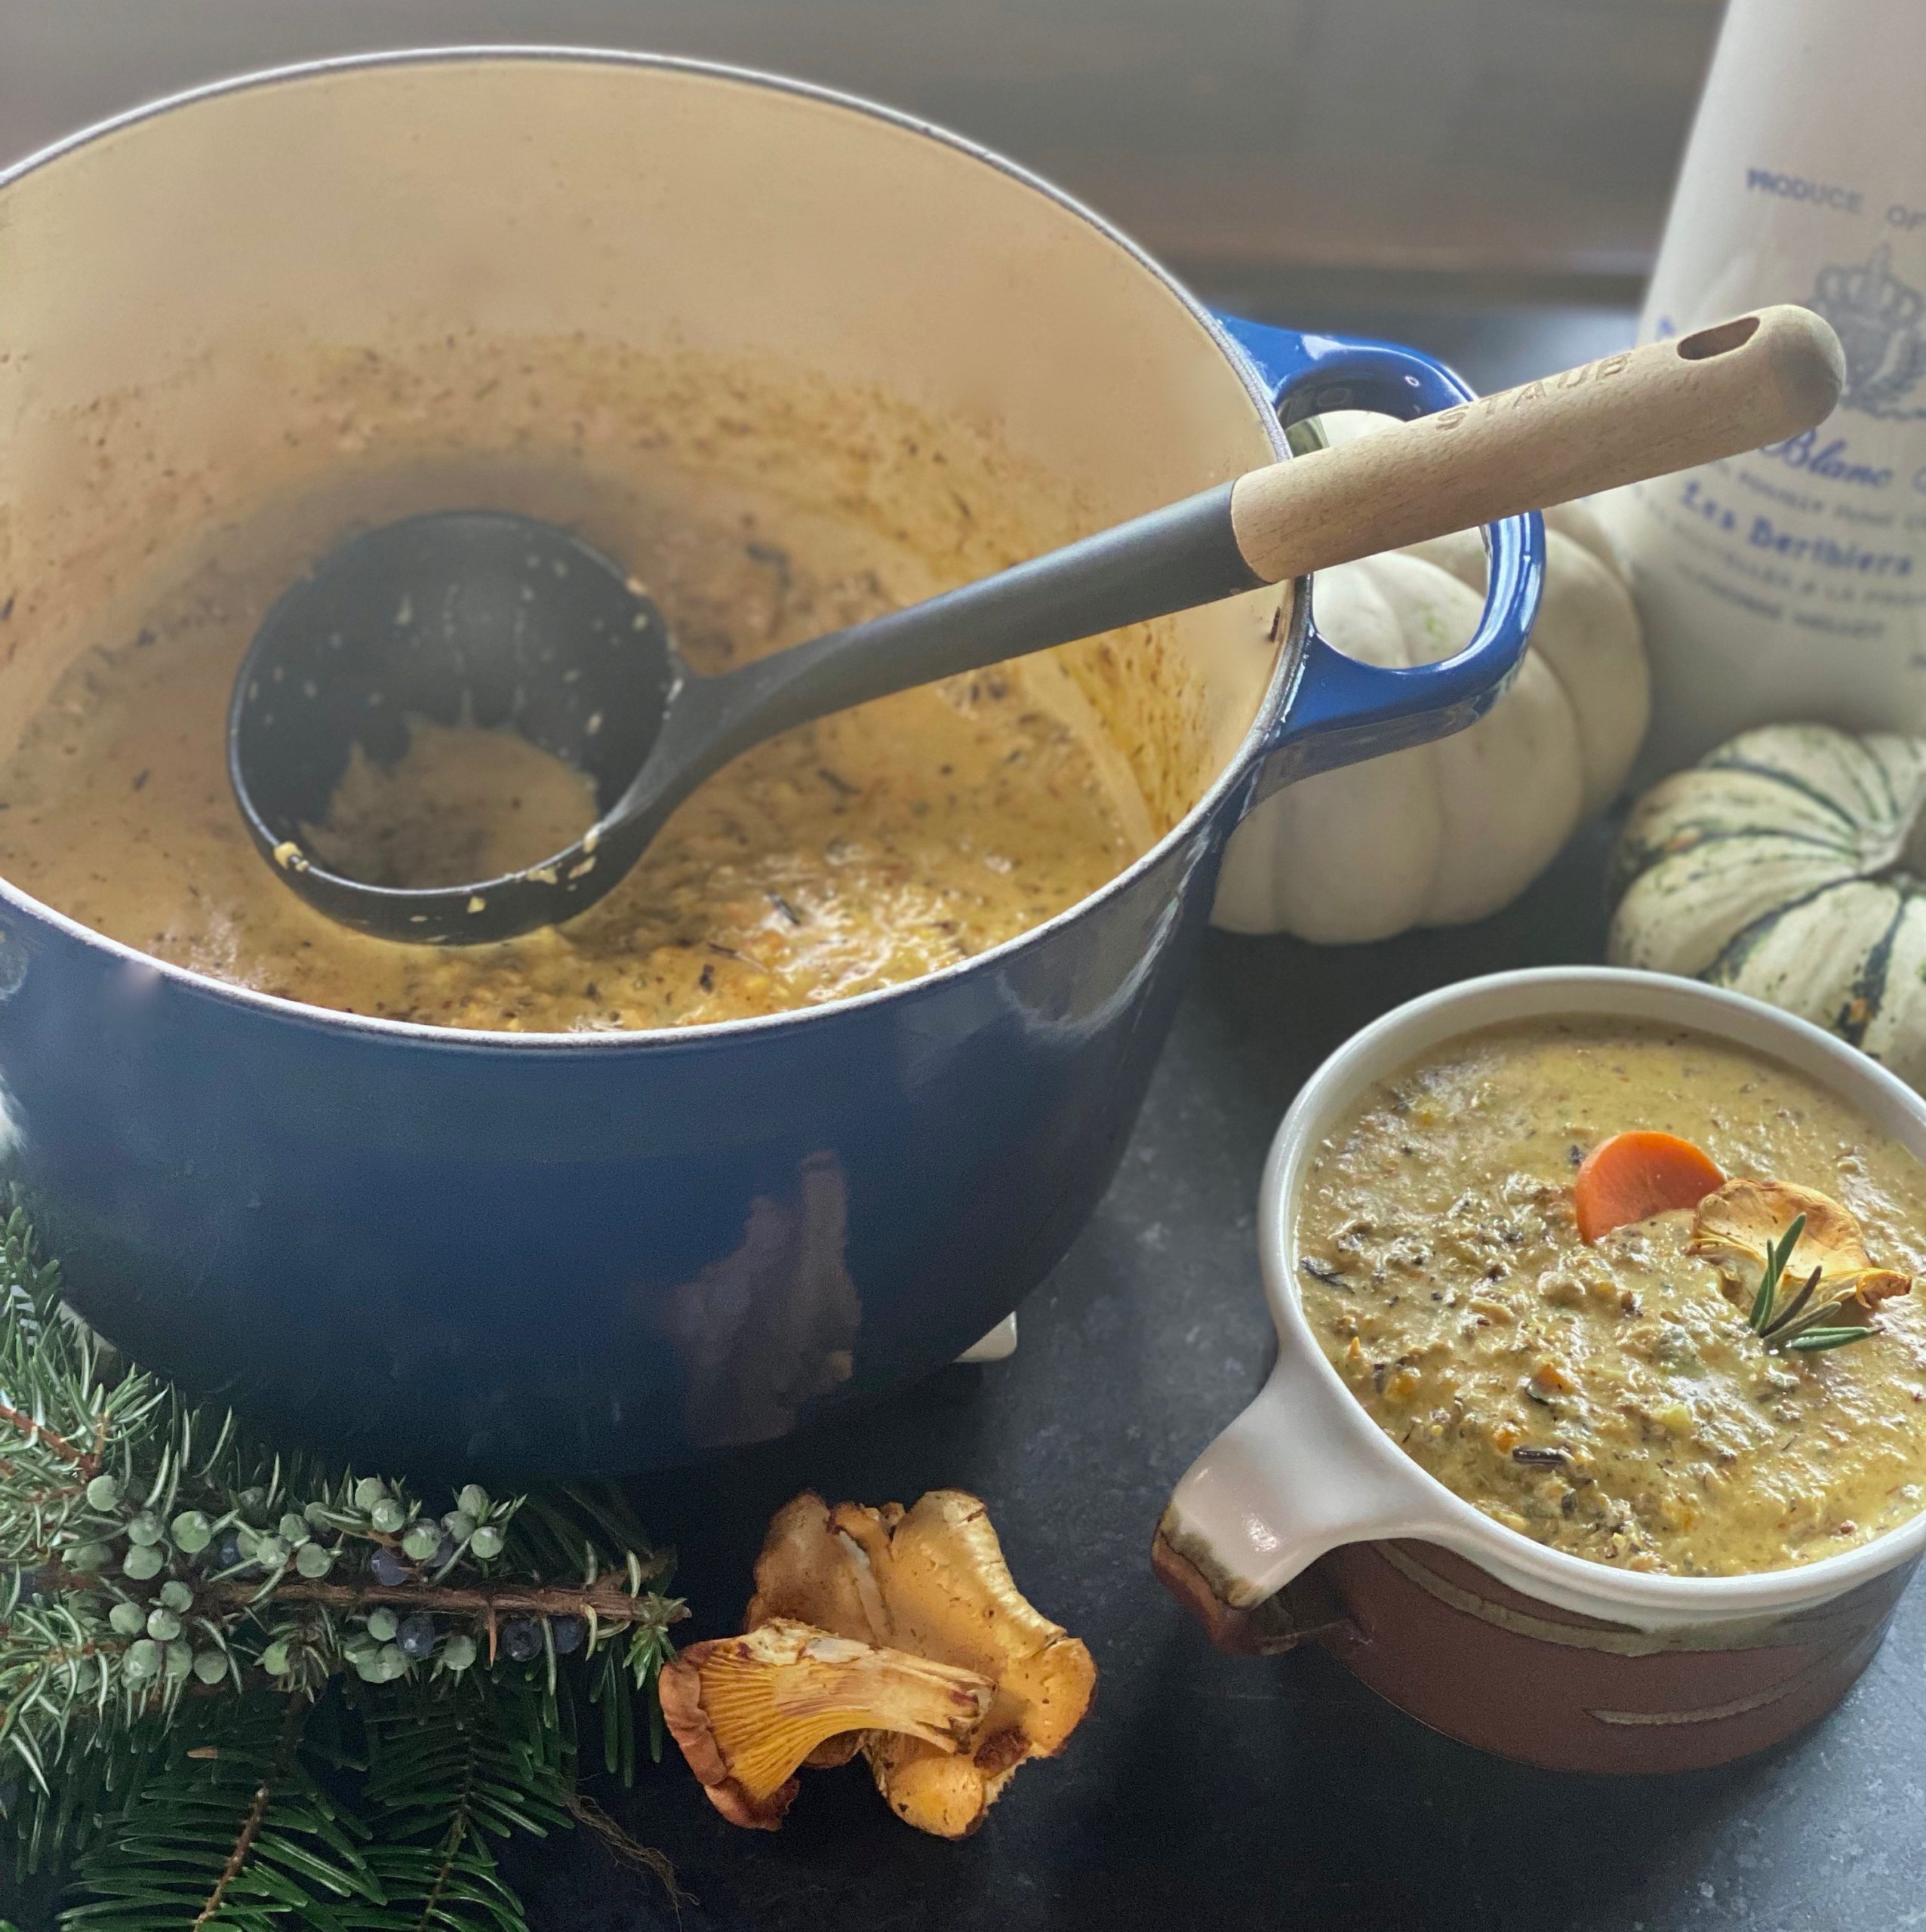 A blue dutch oven with rice and mushroom soup, a ladle with a wooden handle and a bowl of soup with mushrooms scattered around it.